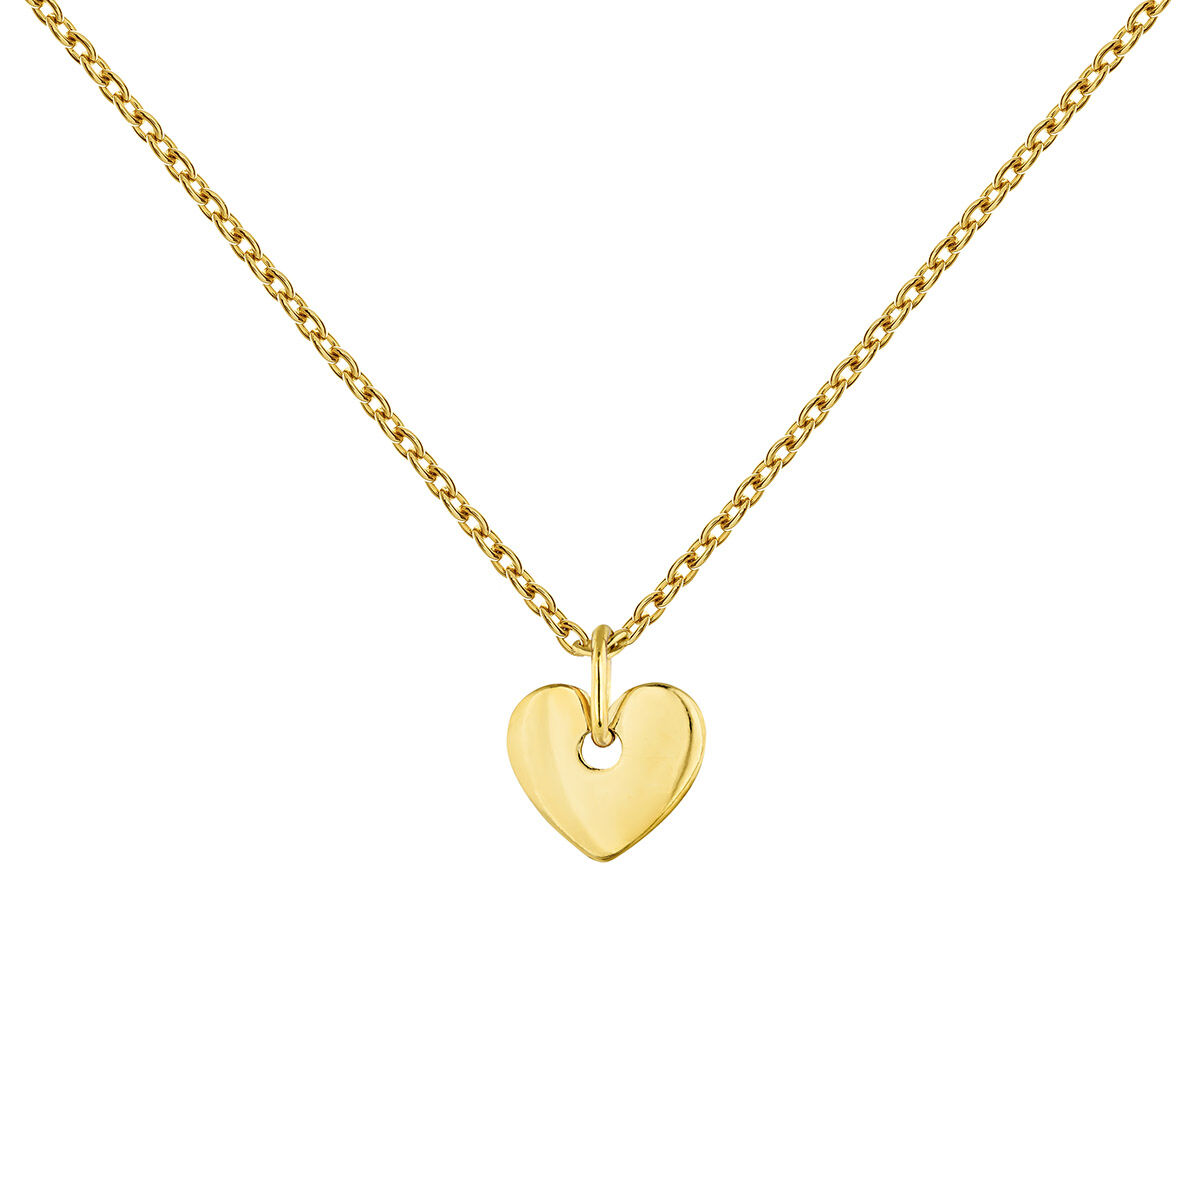 Gold plated heart pendant necklace , J04848-02, hi-res